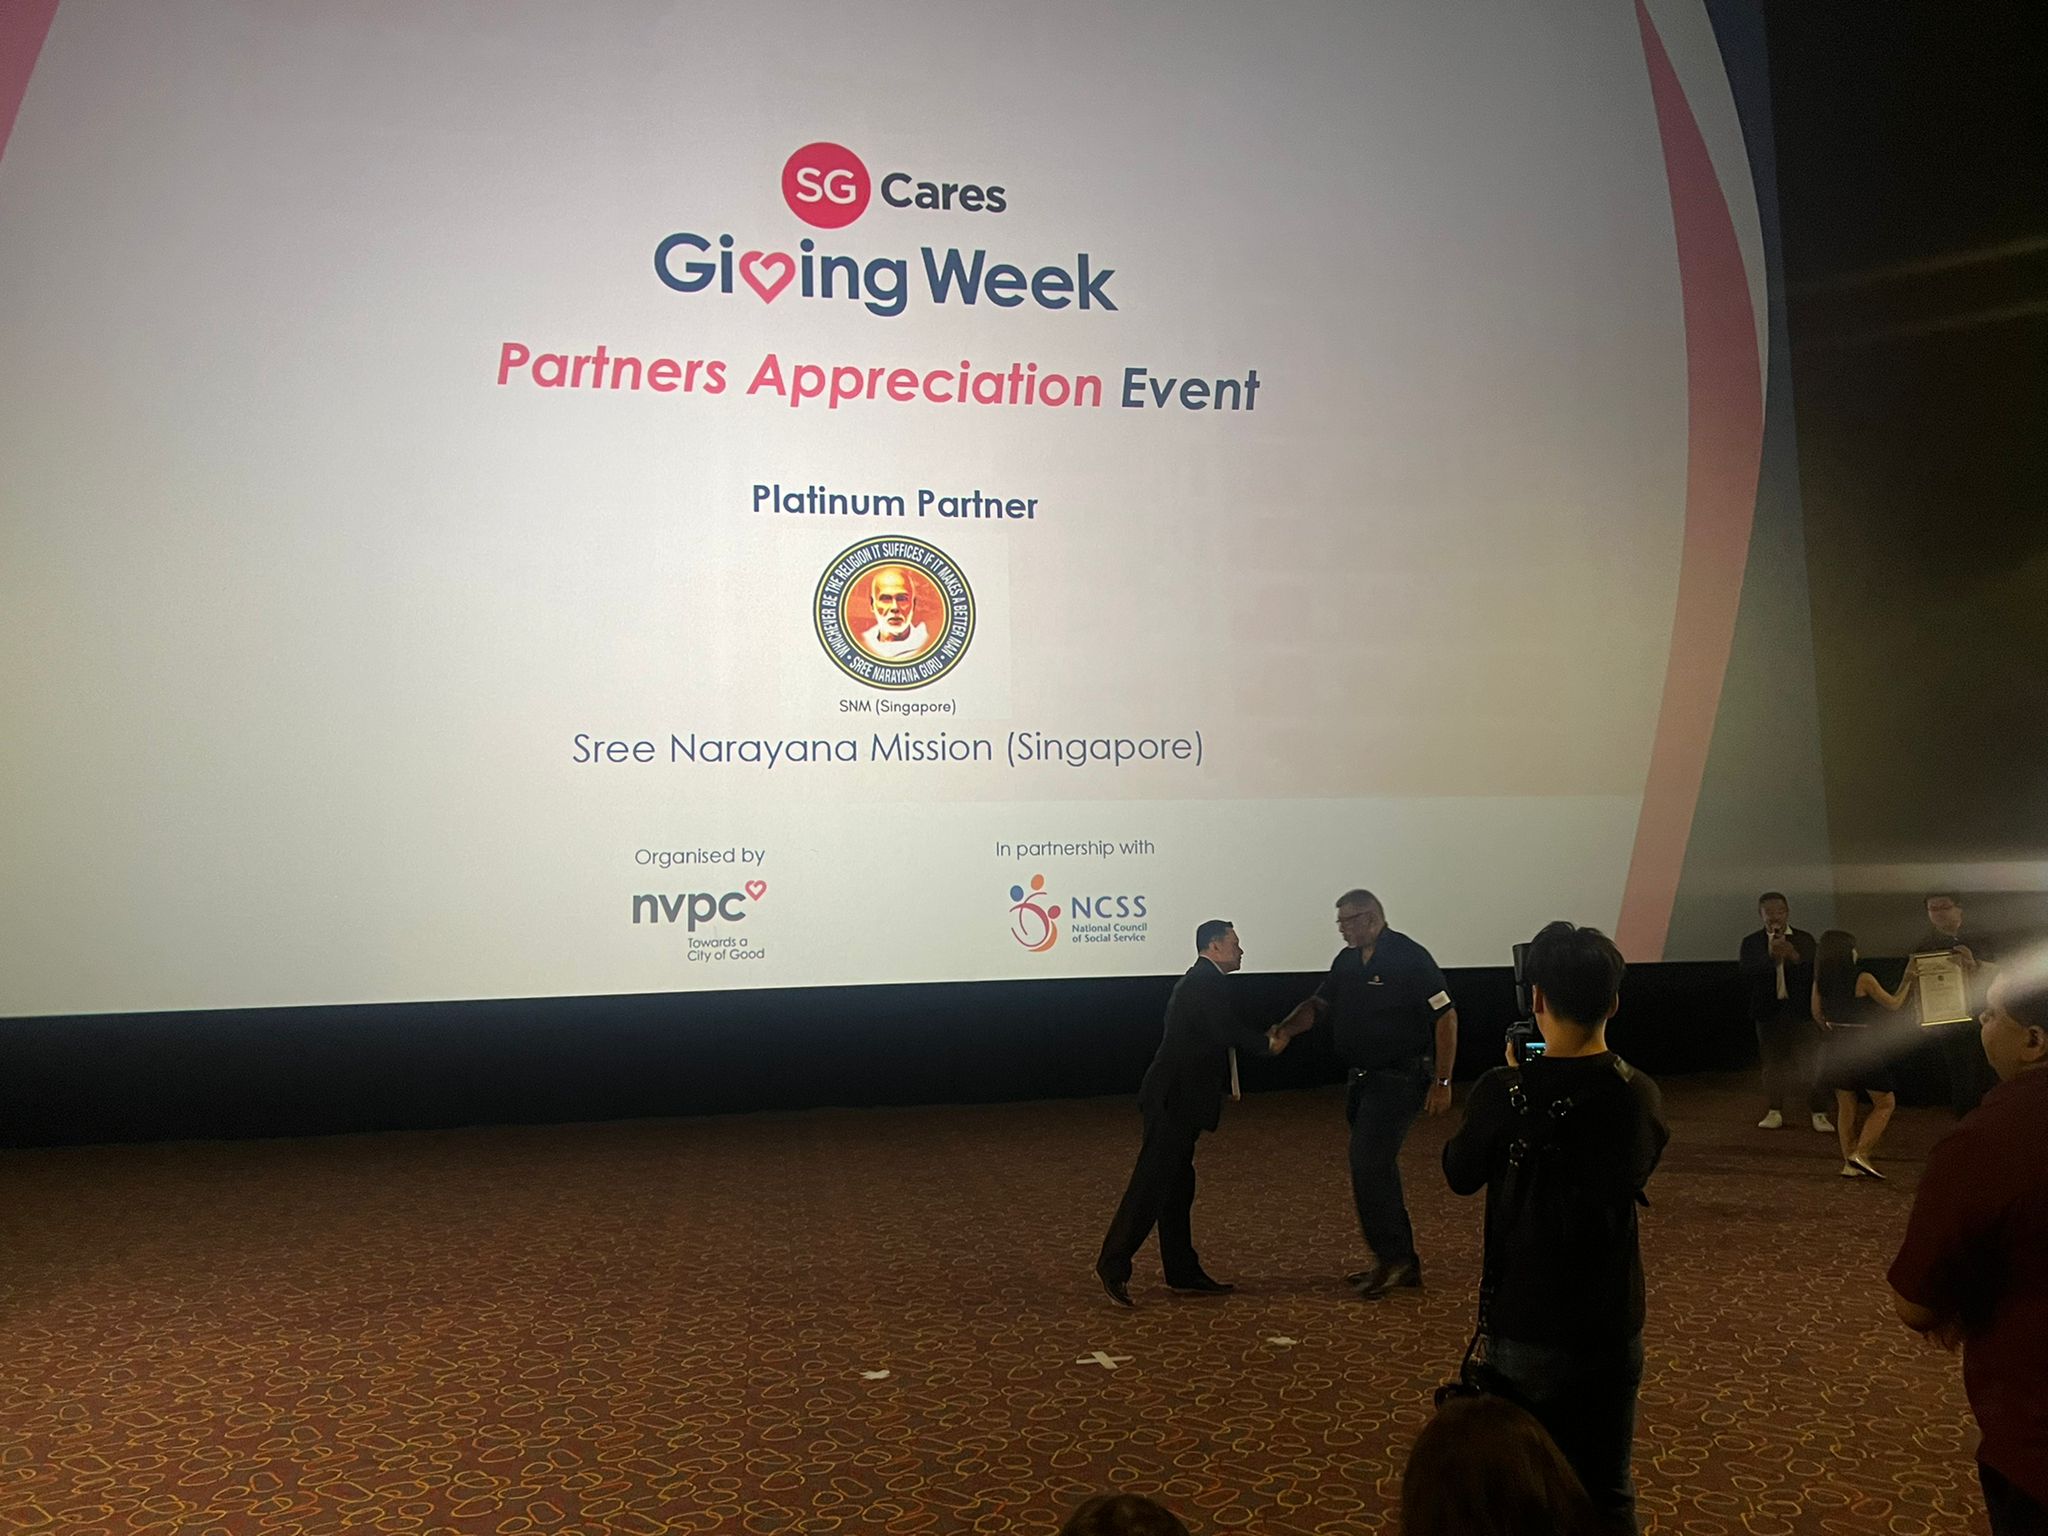 SNM recognised as Platinum Partner for SG Giving Week